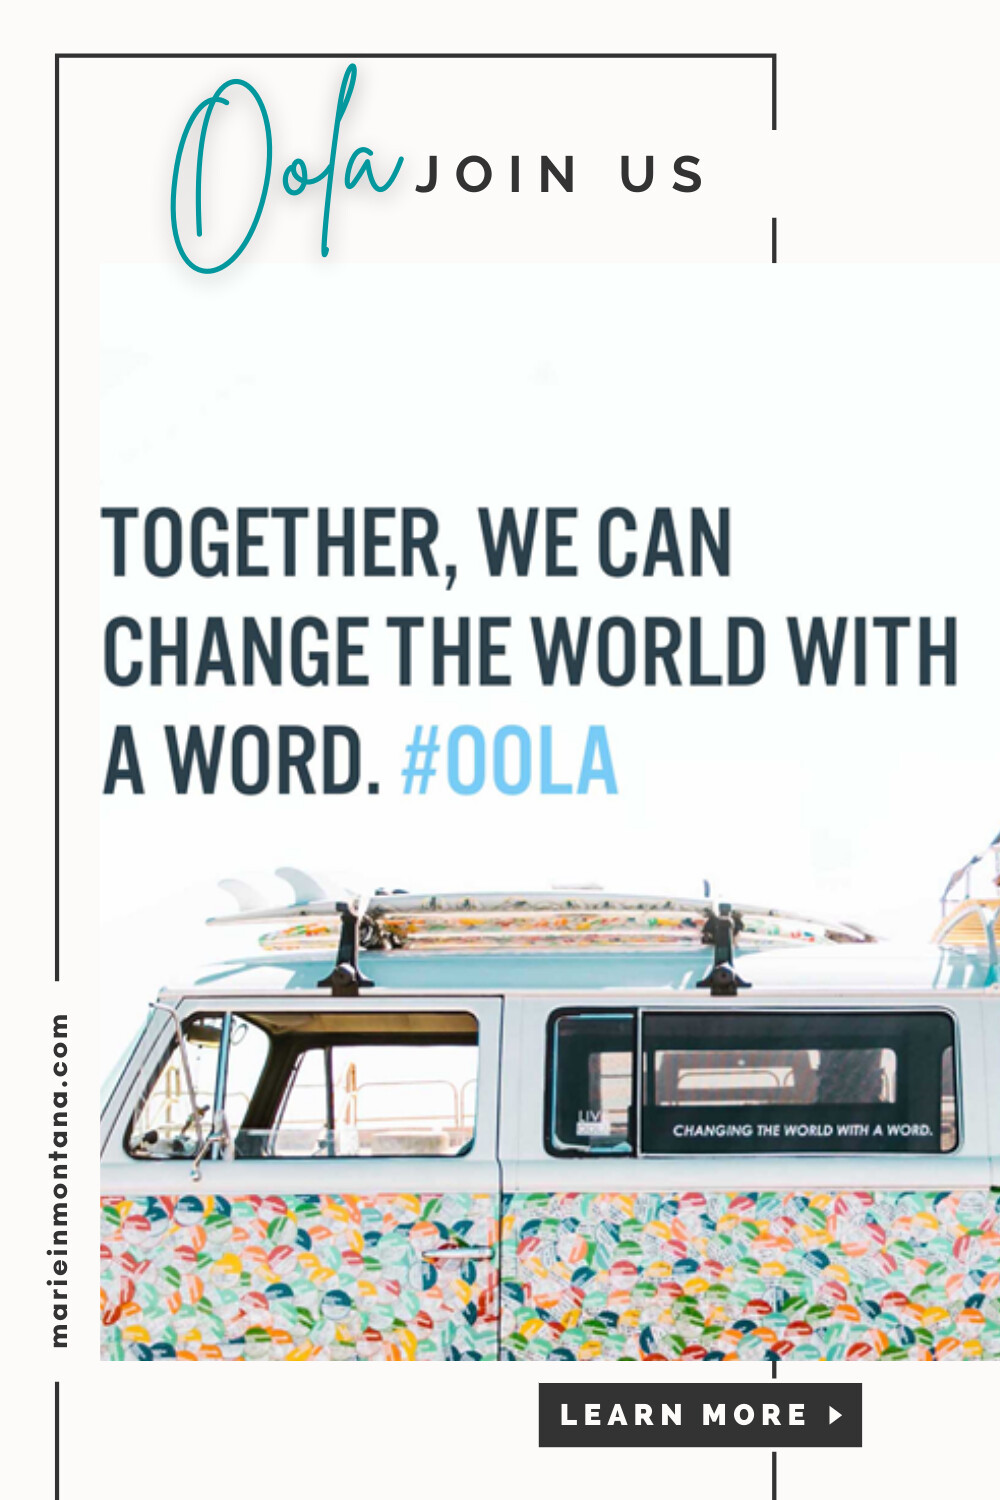 Change the World With One Word- Oola